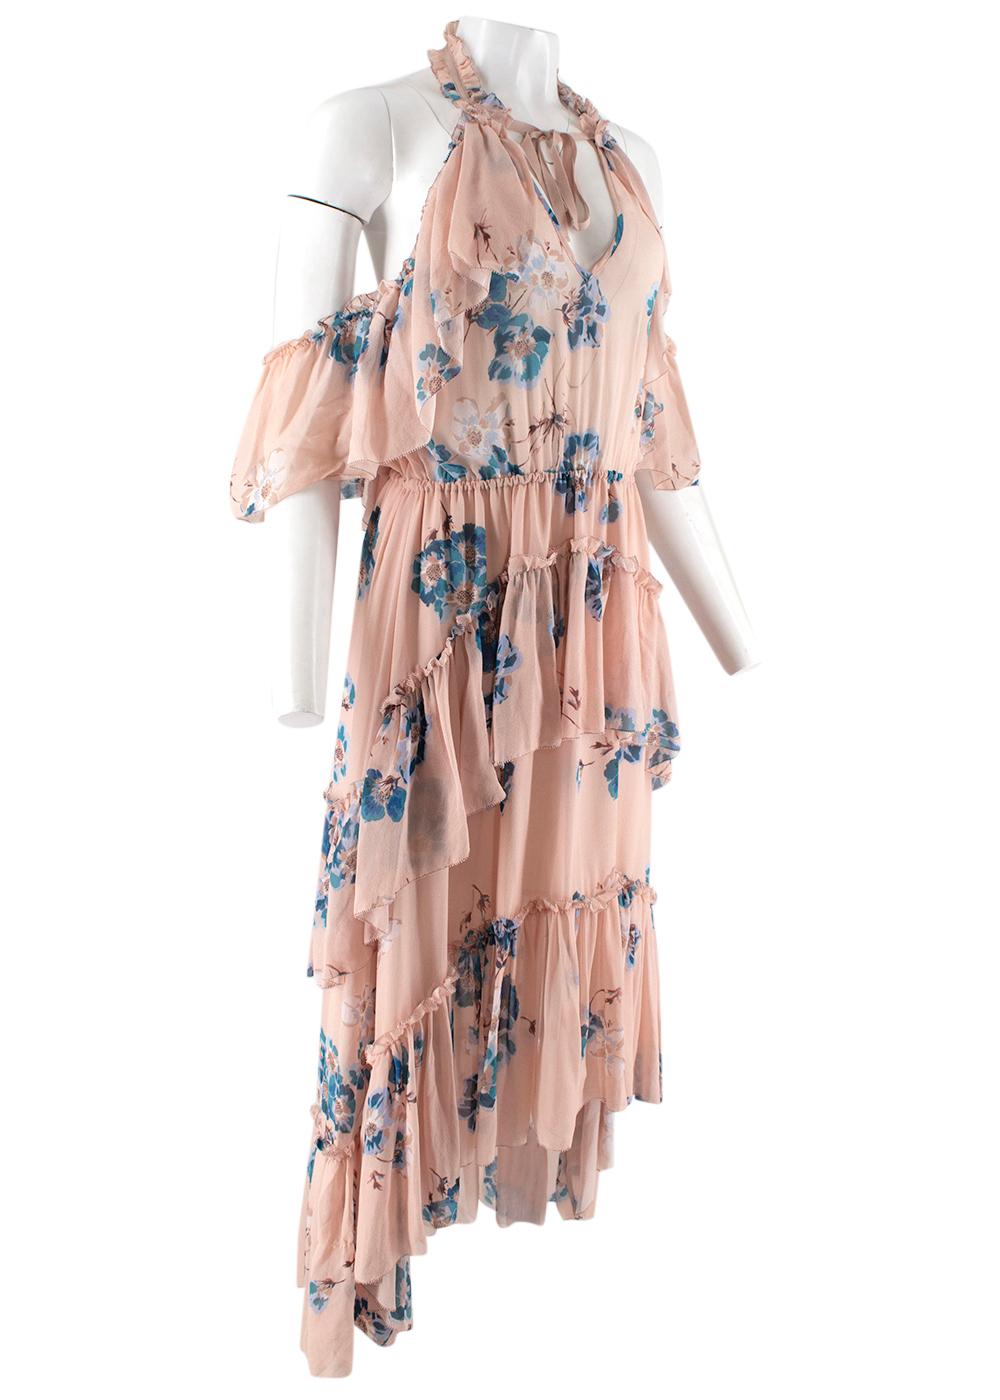 Ulla Johnson Pink And Blue Floral Chiffon Halterneck Dress 

- Halterneck tiered backless maxi dress with ruffle details 
- Light pink silk fabric with delicate blue floral print 
- Elasticated waistband and lined with an asymmetric hem 

Materials